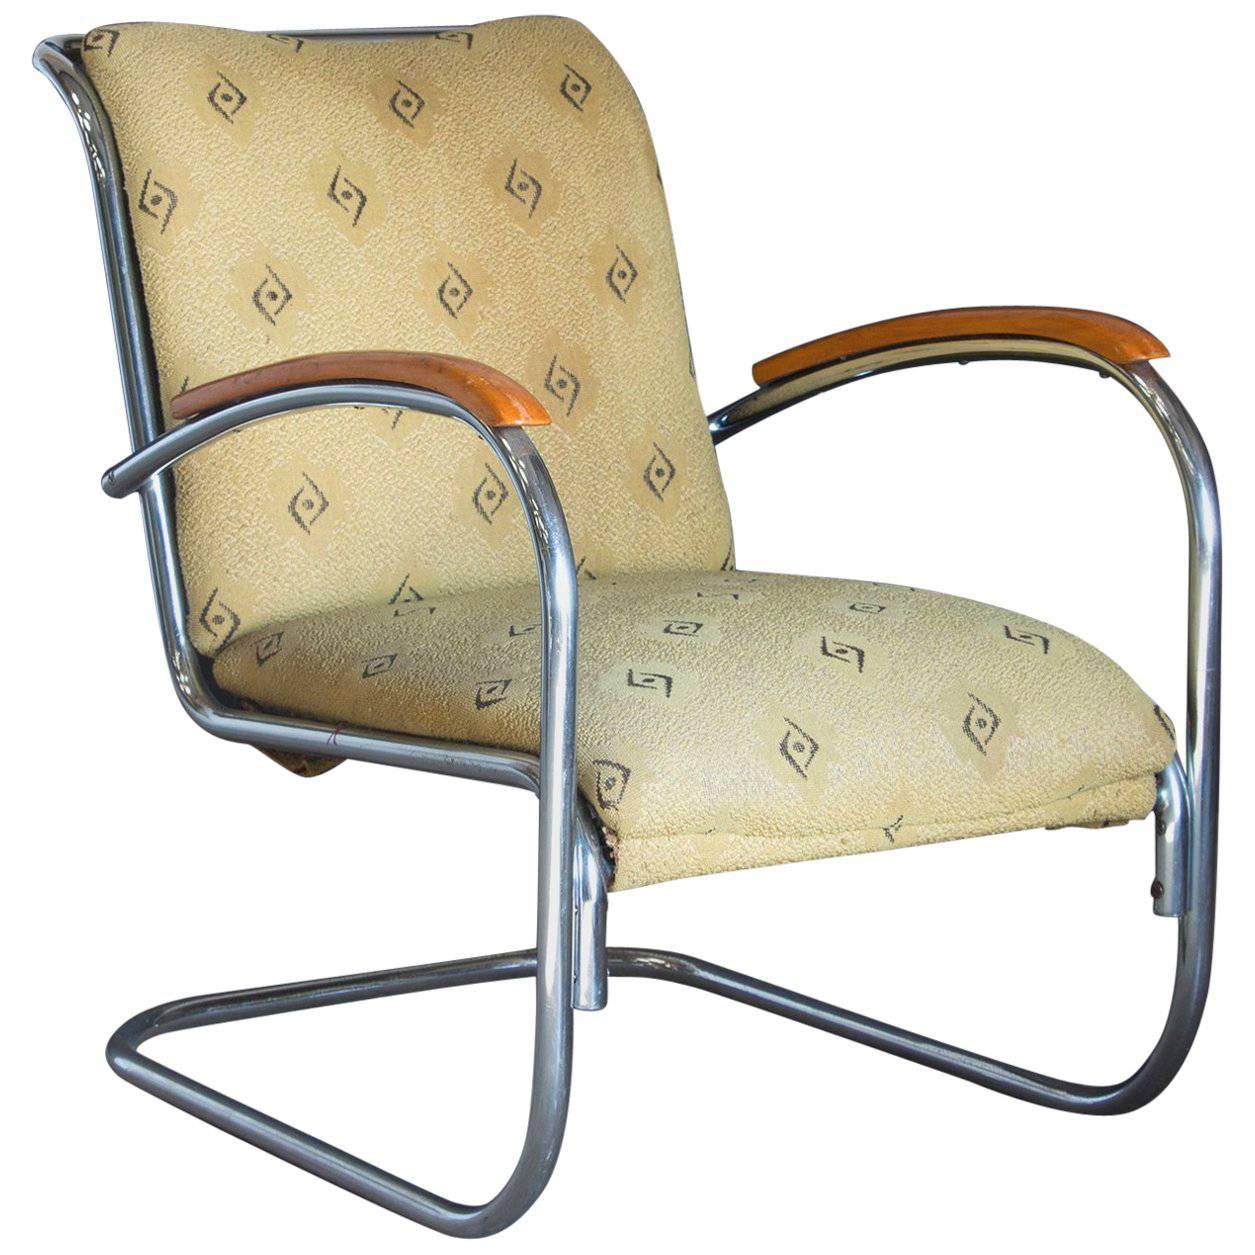 Original, Early Vintage Tubular Easy Chair with Original Fabric, circa 1930 For Sale